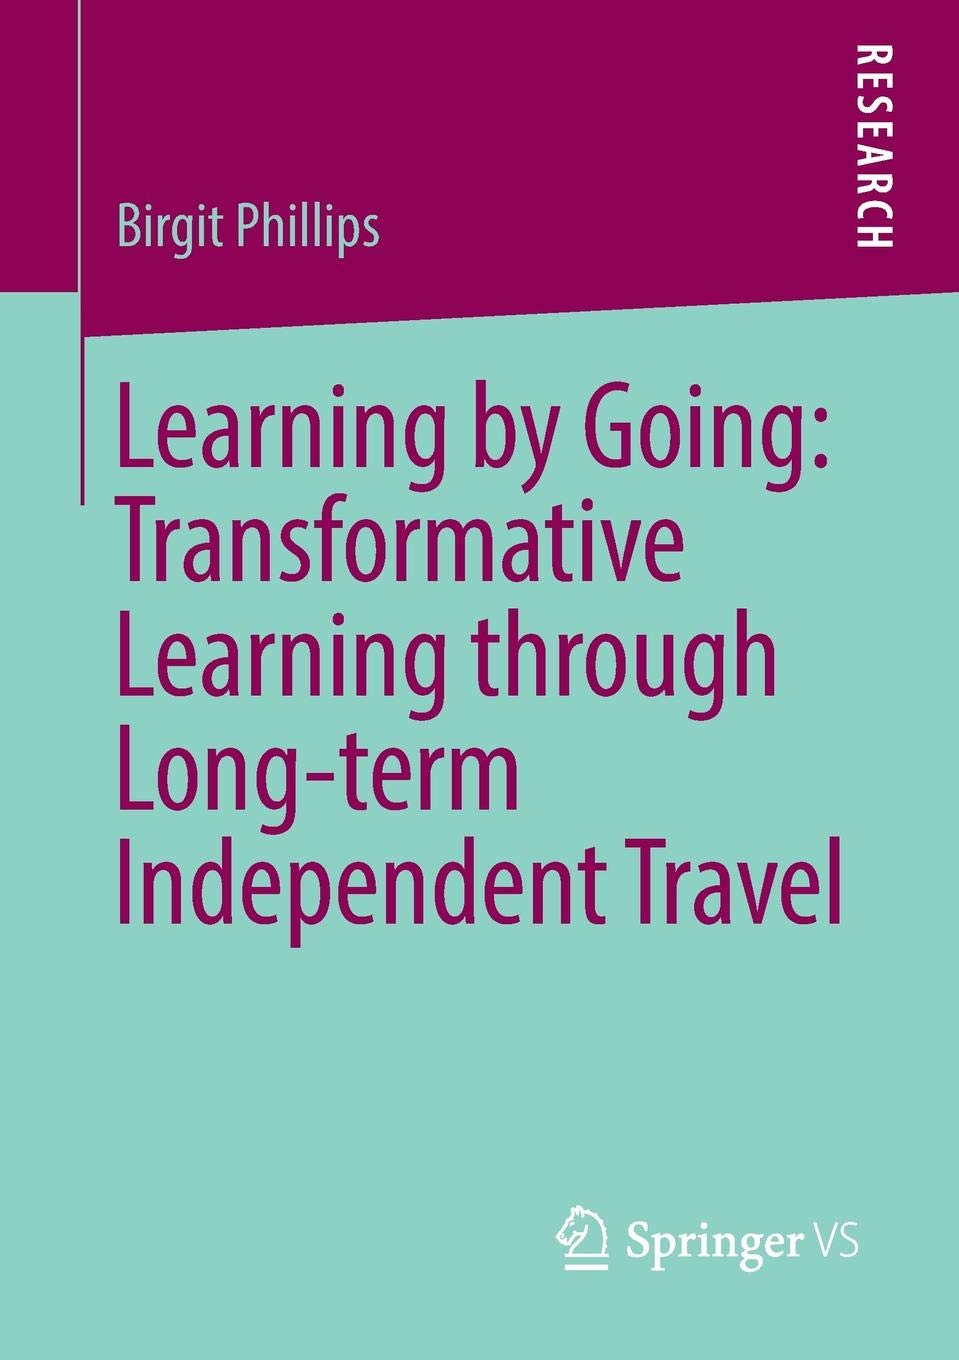 Learning by going : transformative learning through long-term independent travel